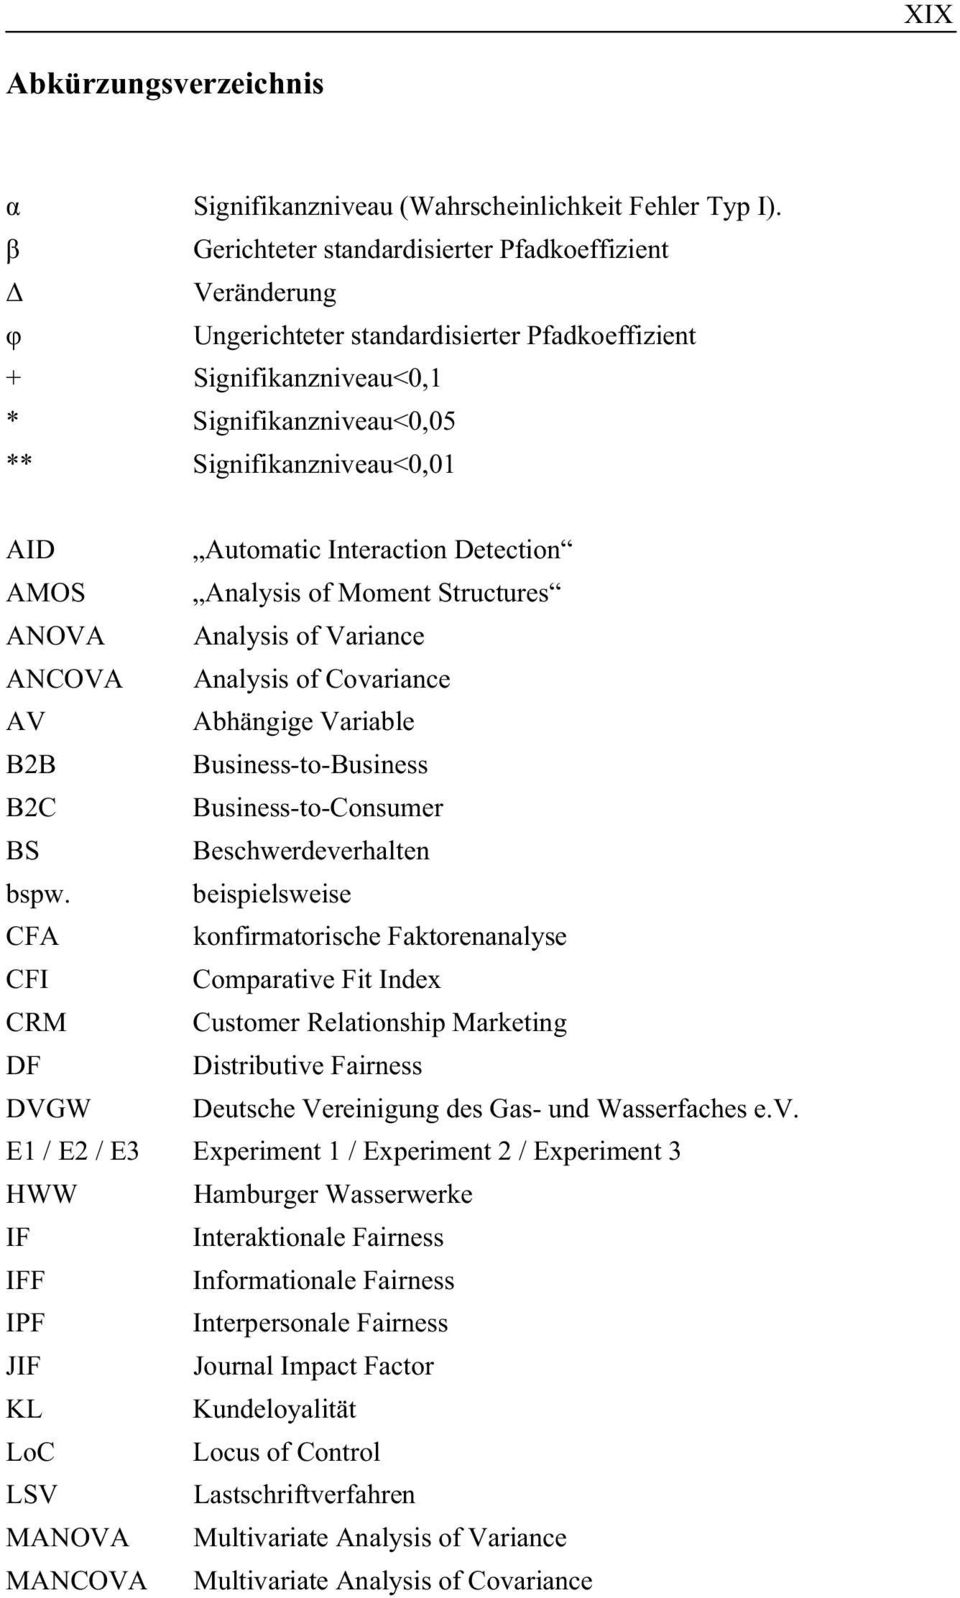 Interaction Detection AMOS Analysis of Moment Structures ANOVA Analysis of Variance ANCOVA Analysis of Covariance AV Abhängige Variable B2B Business-to-Business B2C Business-to-Consumer BS